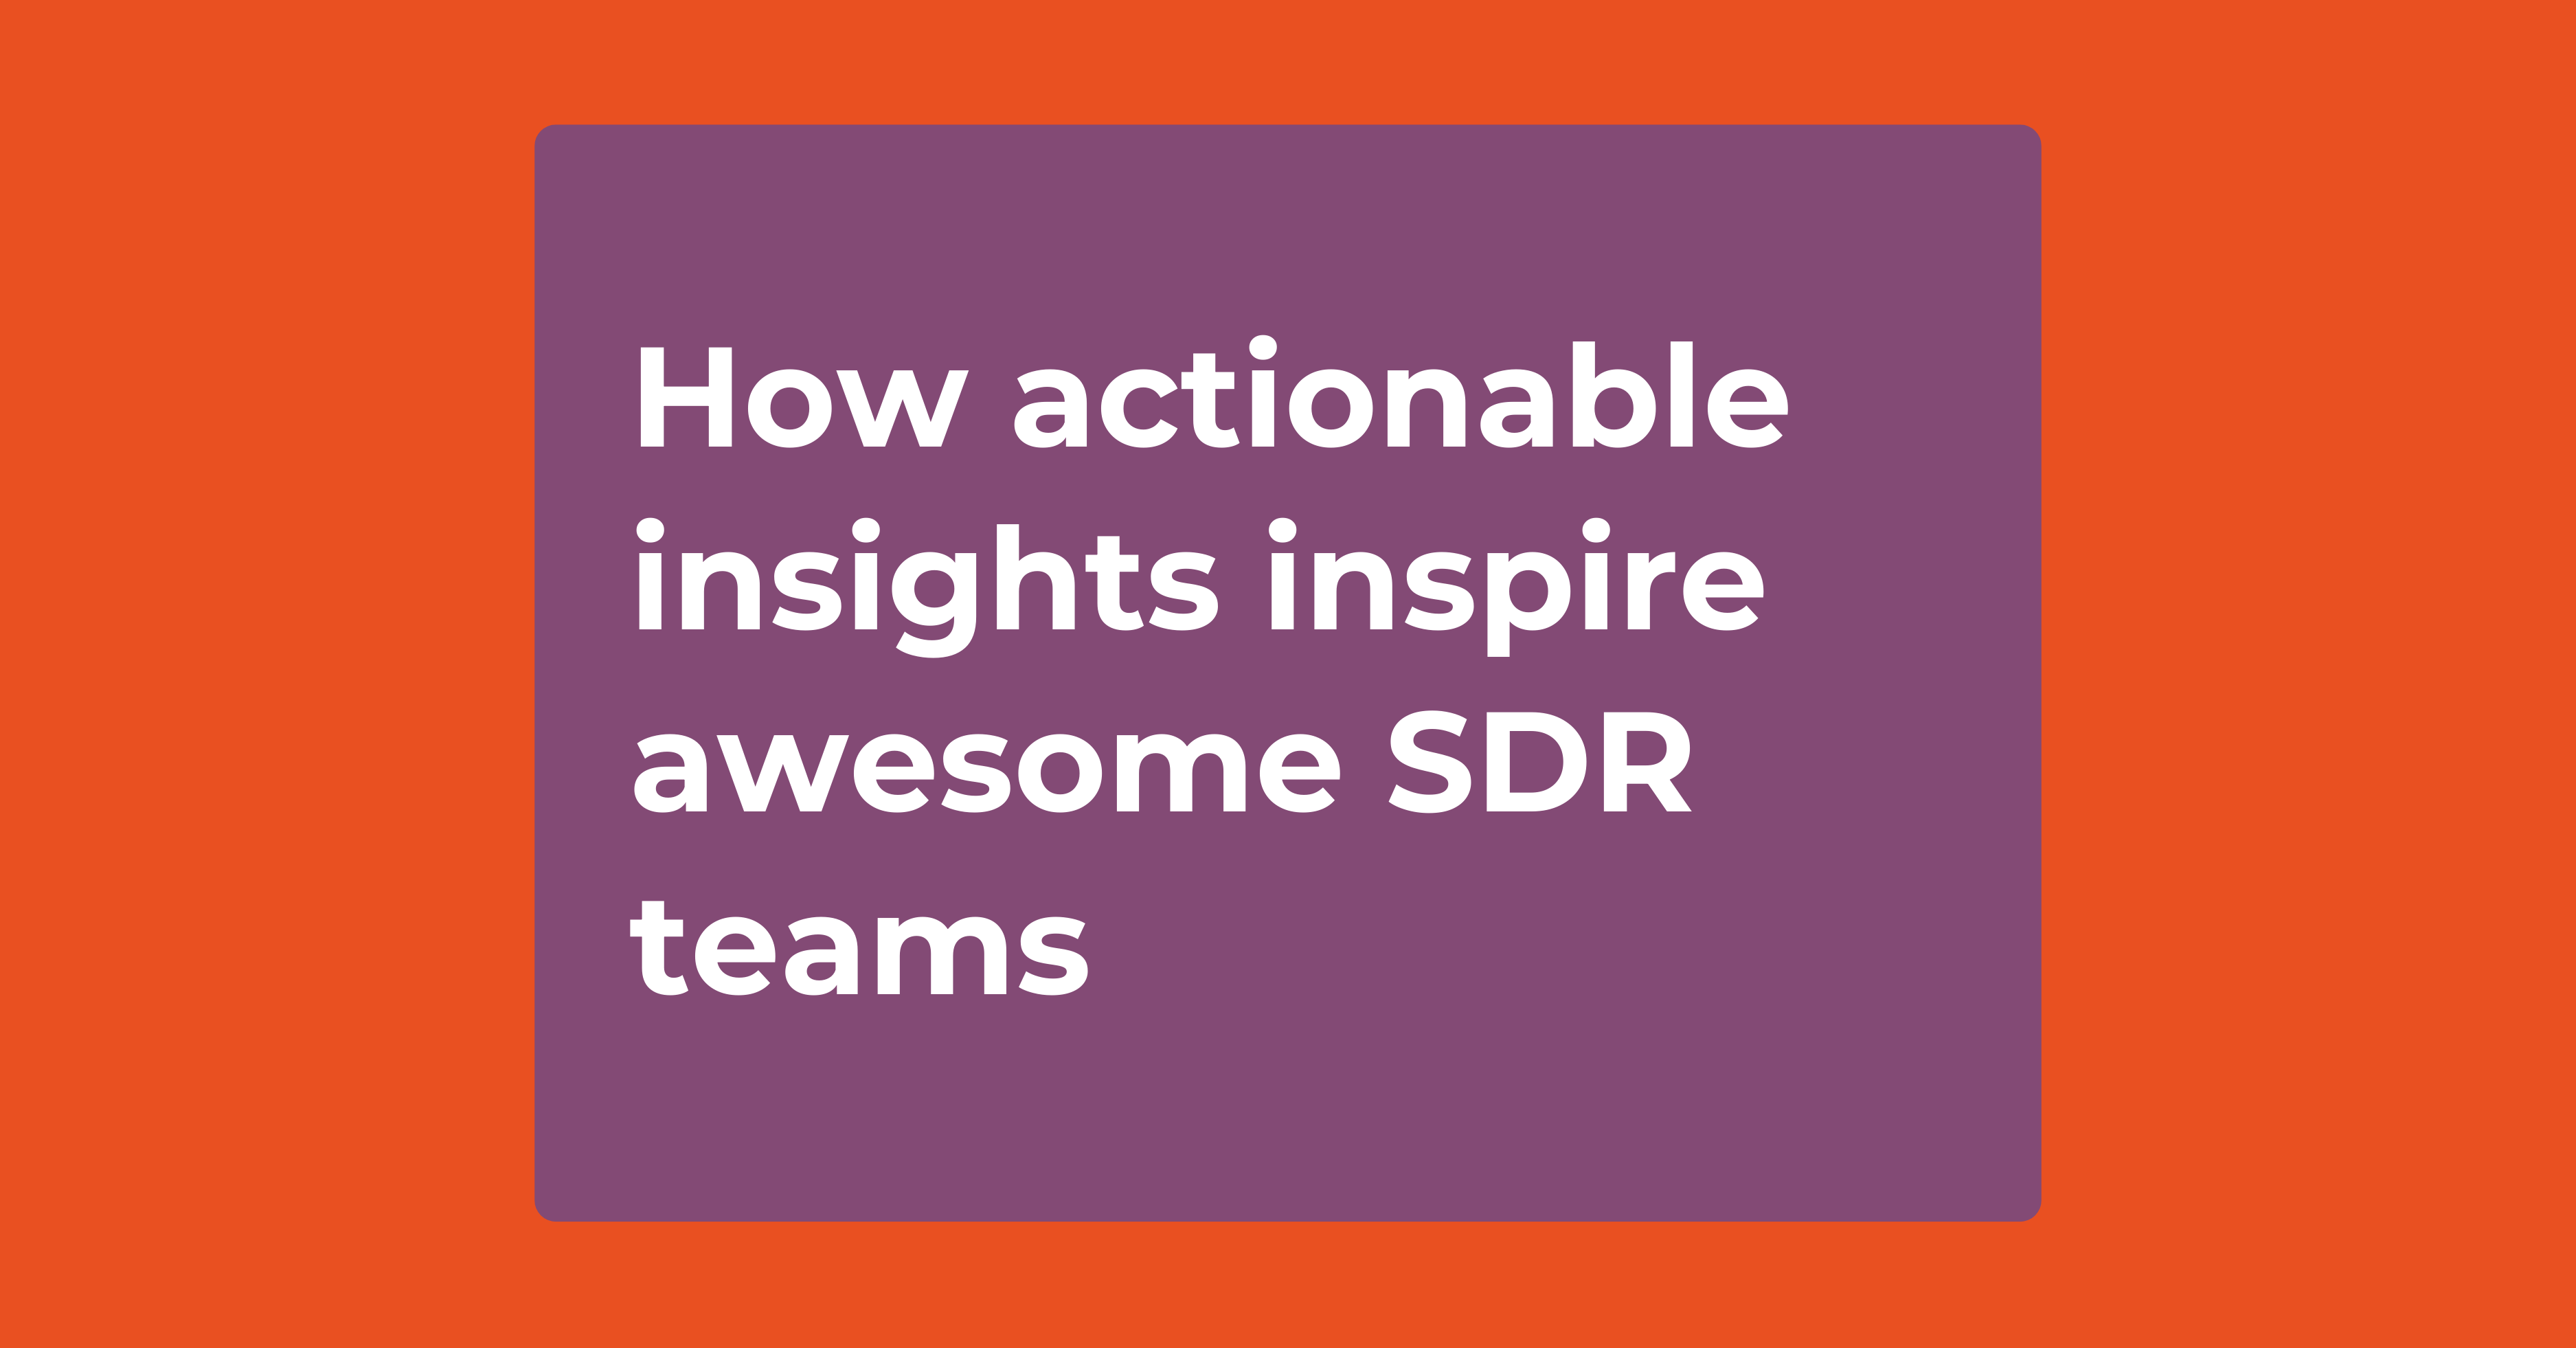 Five ways data-driven SDR leaders motivate their teams